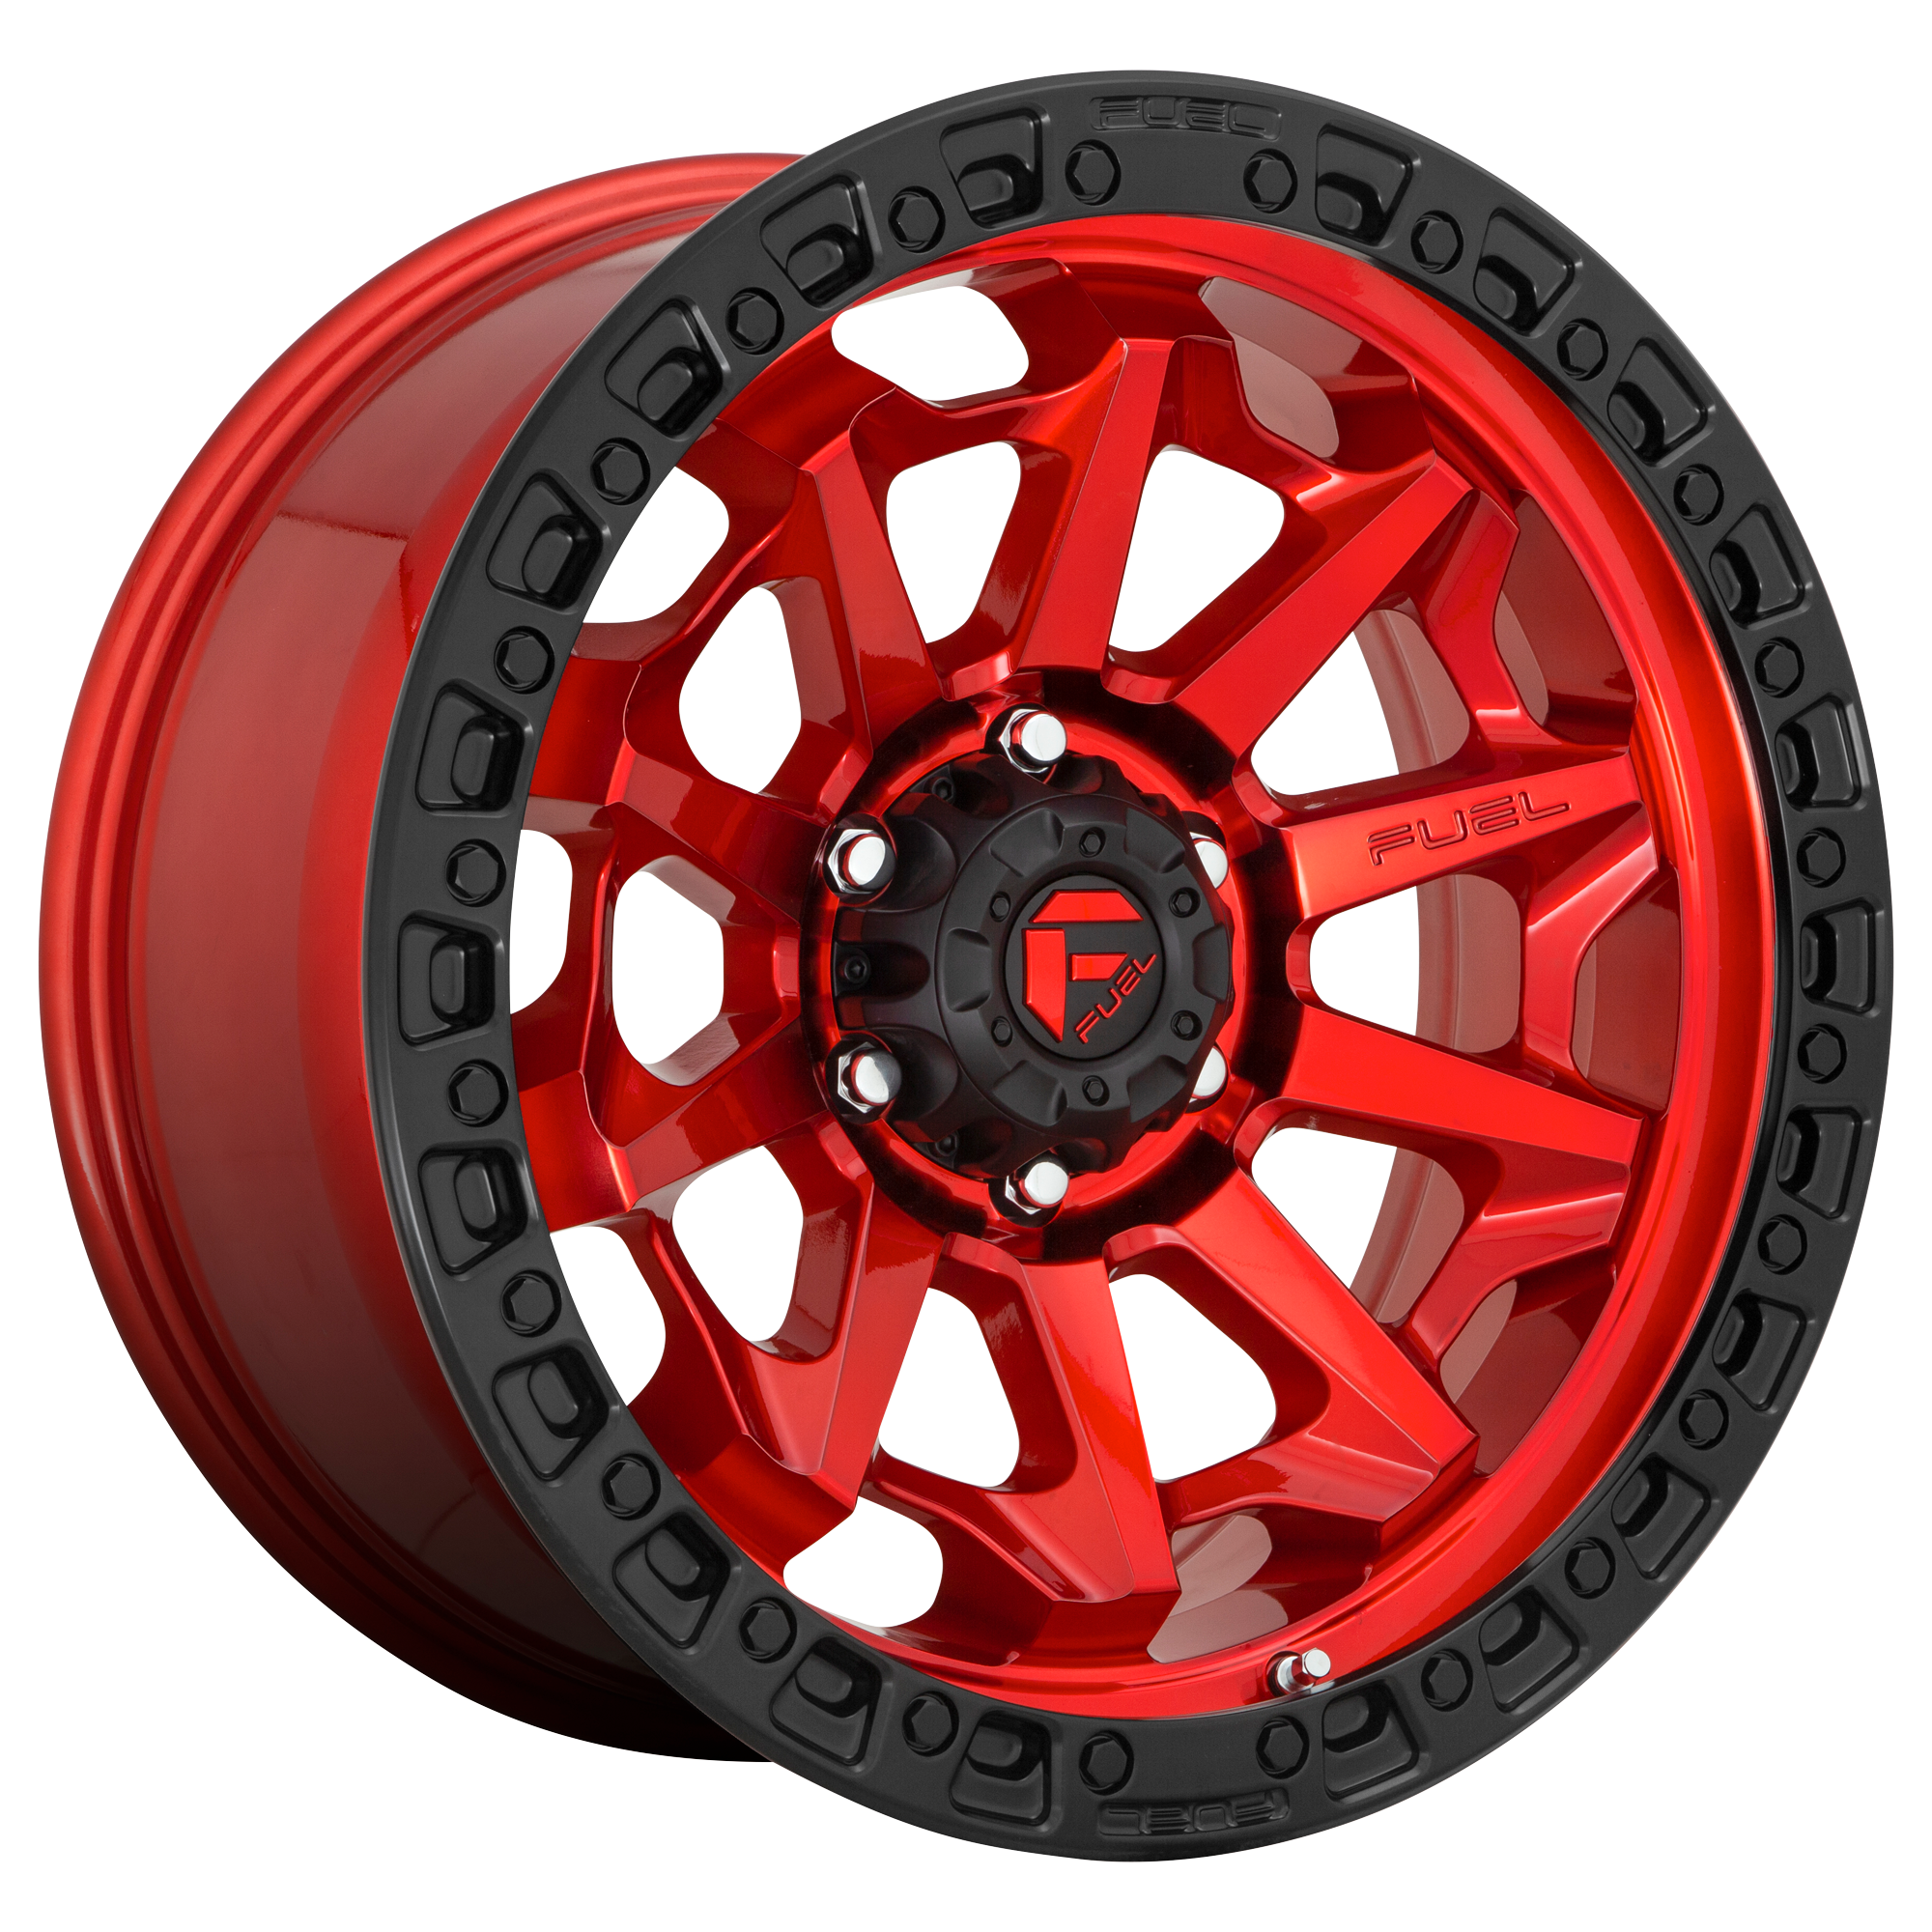 COVERT 20x9 5x139.70 CANDY RED BLACK BEAD RING (20 mm) - Tires and Engine Performance